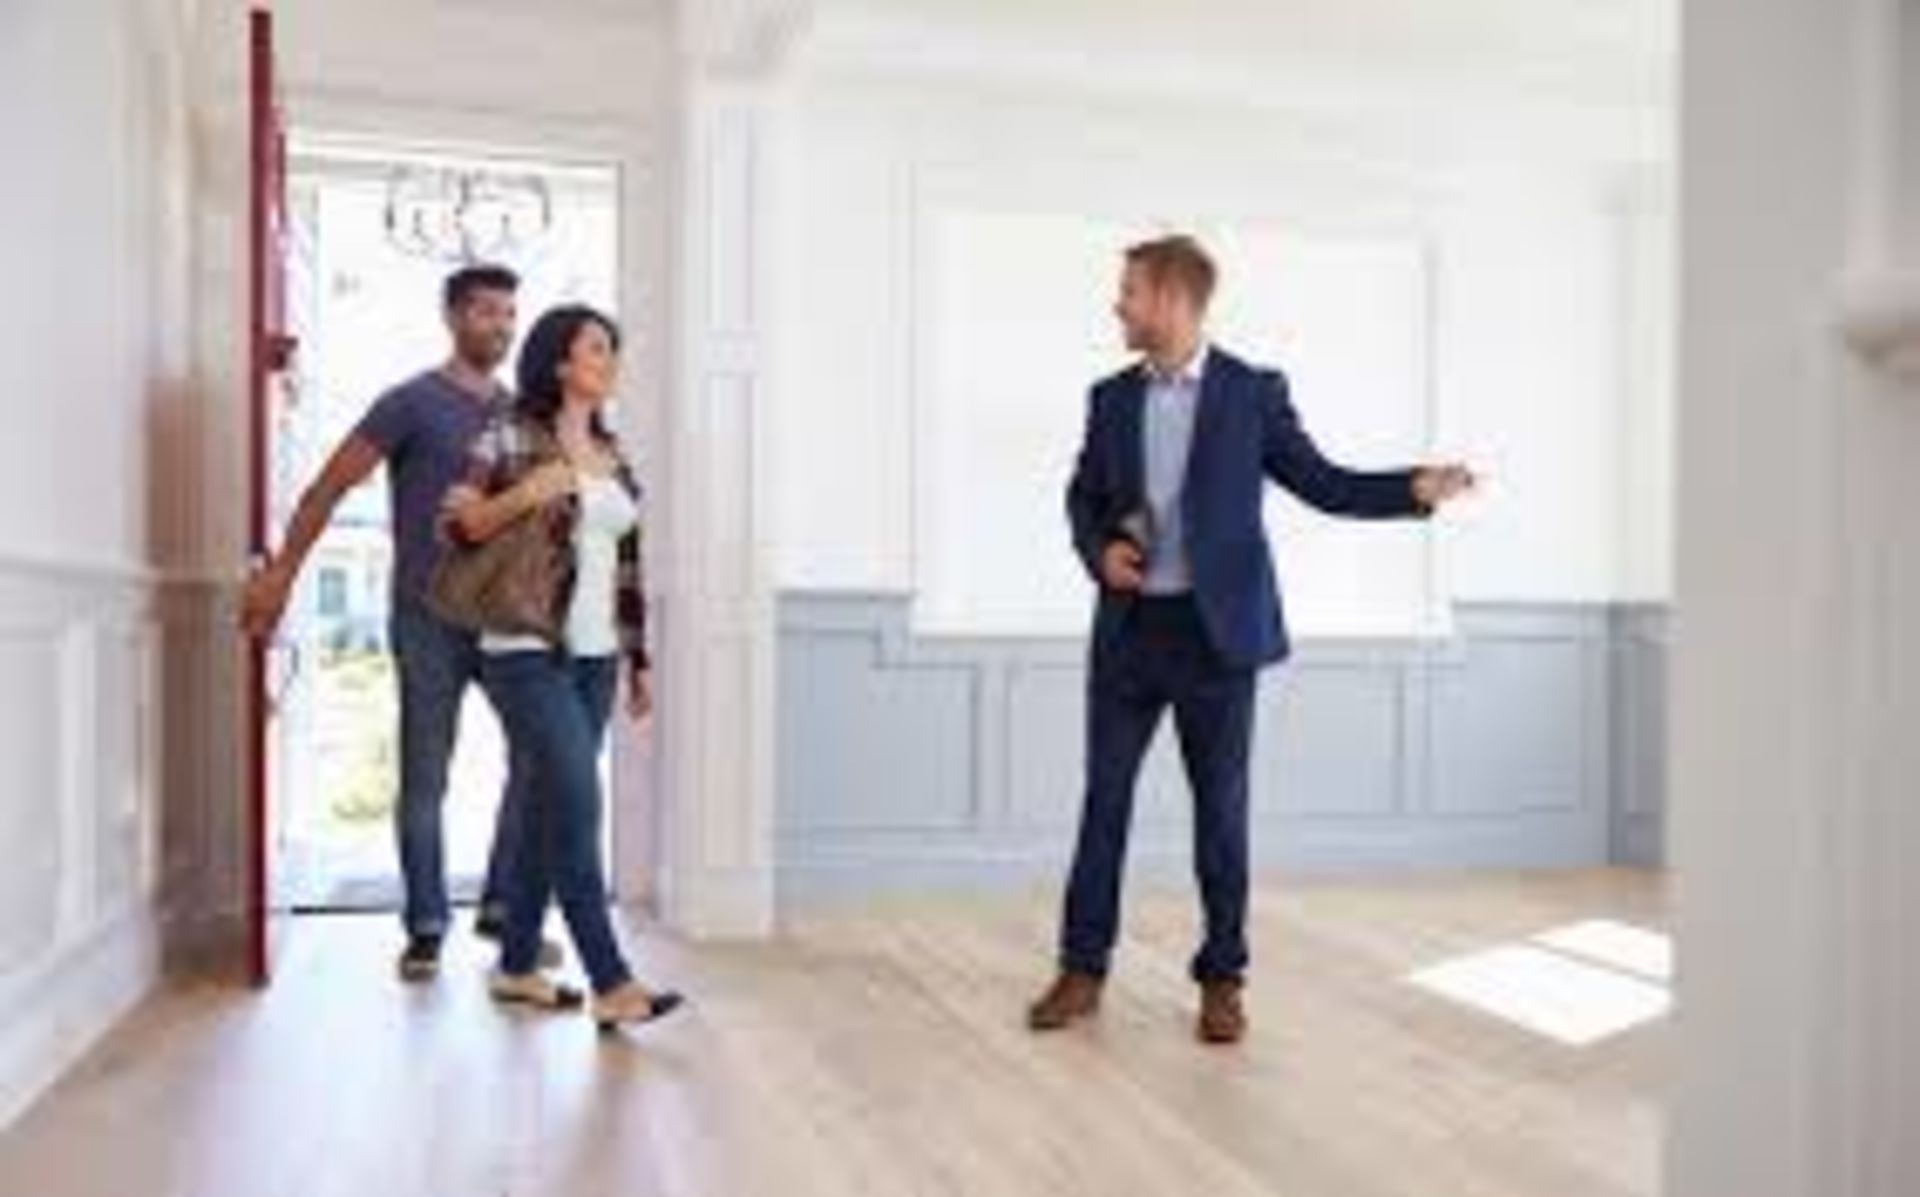 Looking to Sell Your Home in 2019?